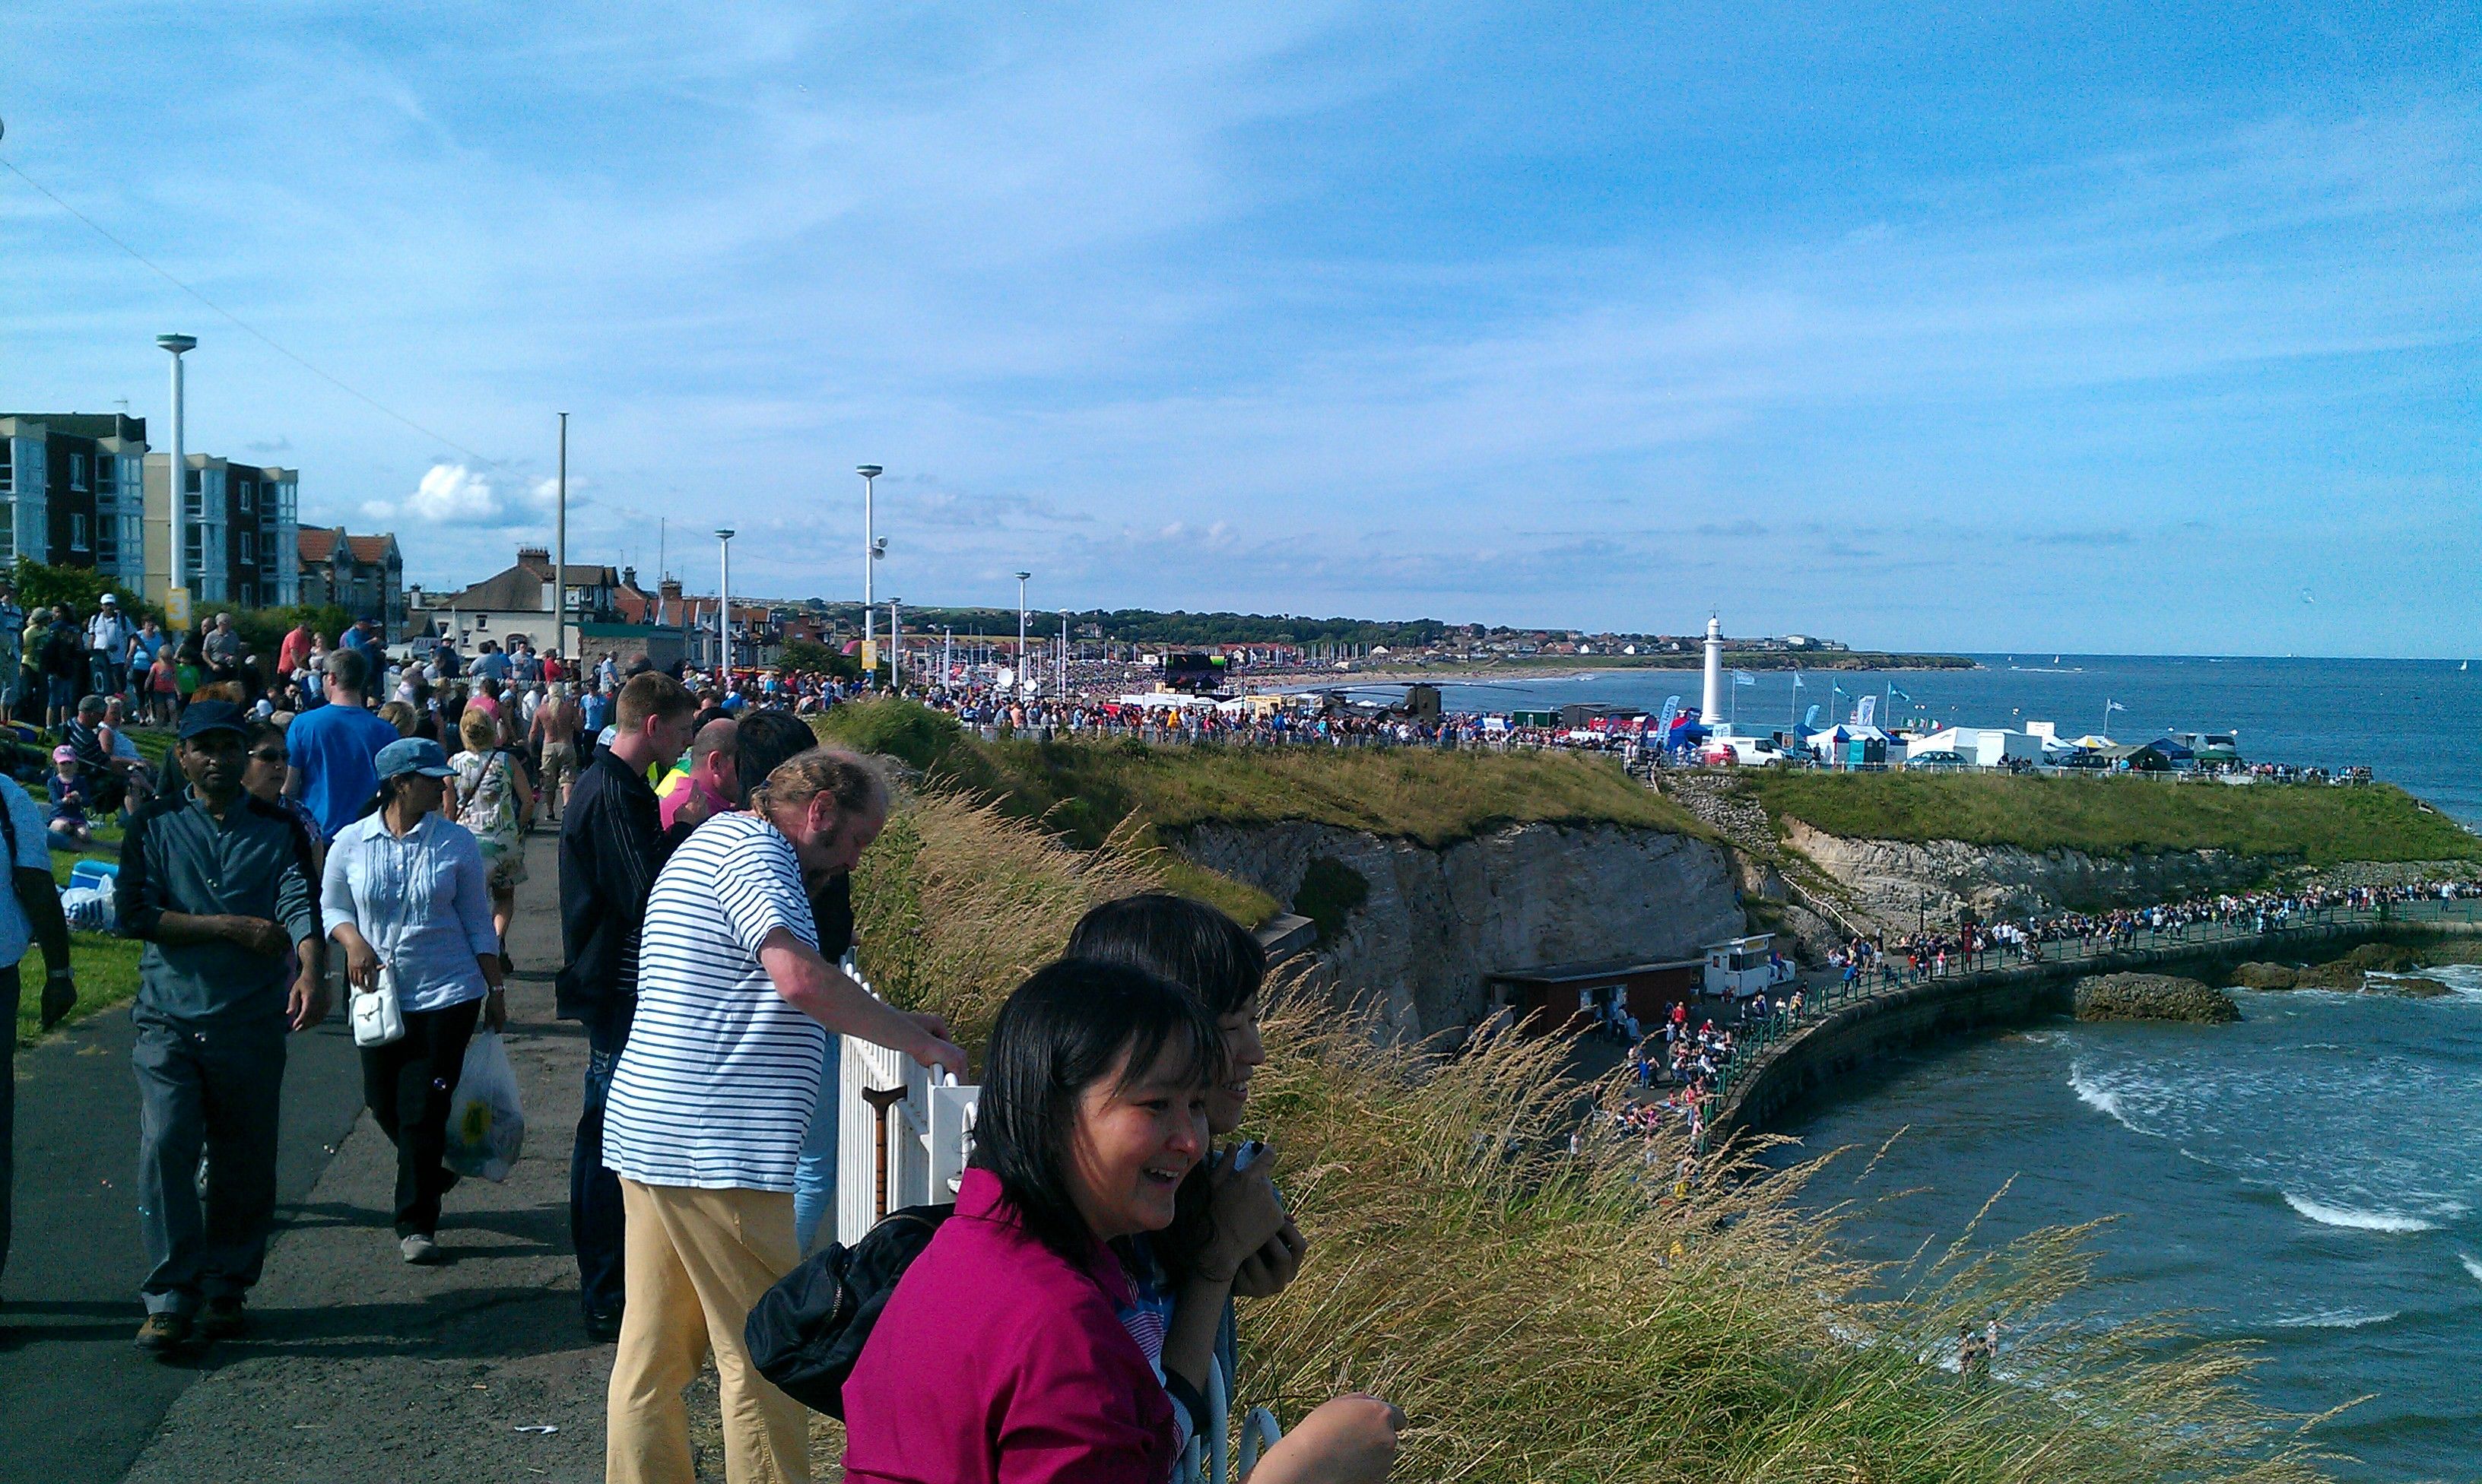 Fantastic weather and a great show  The seafront is full